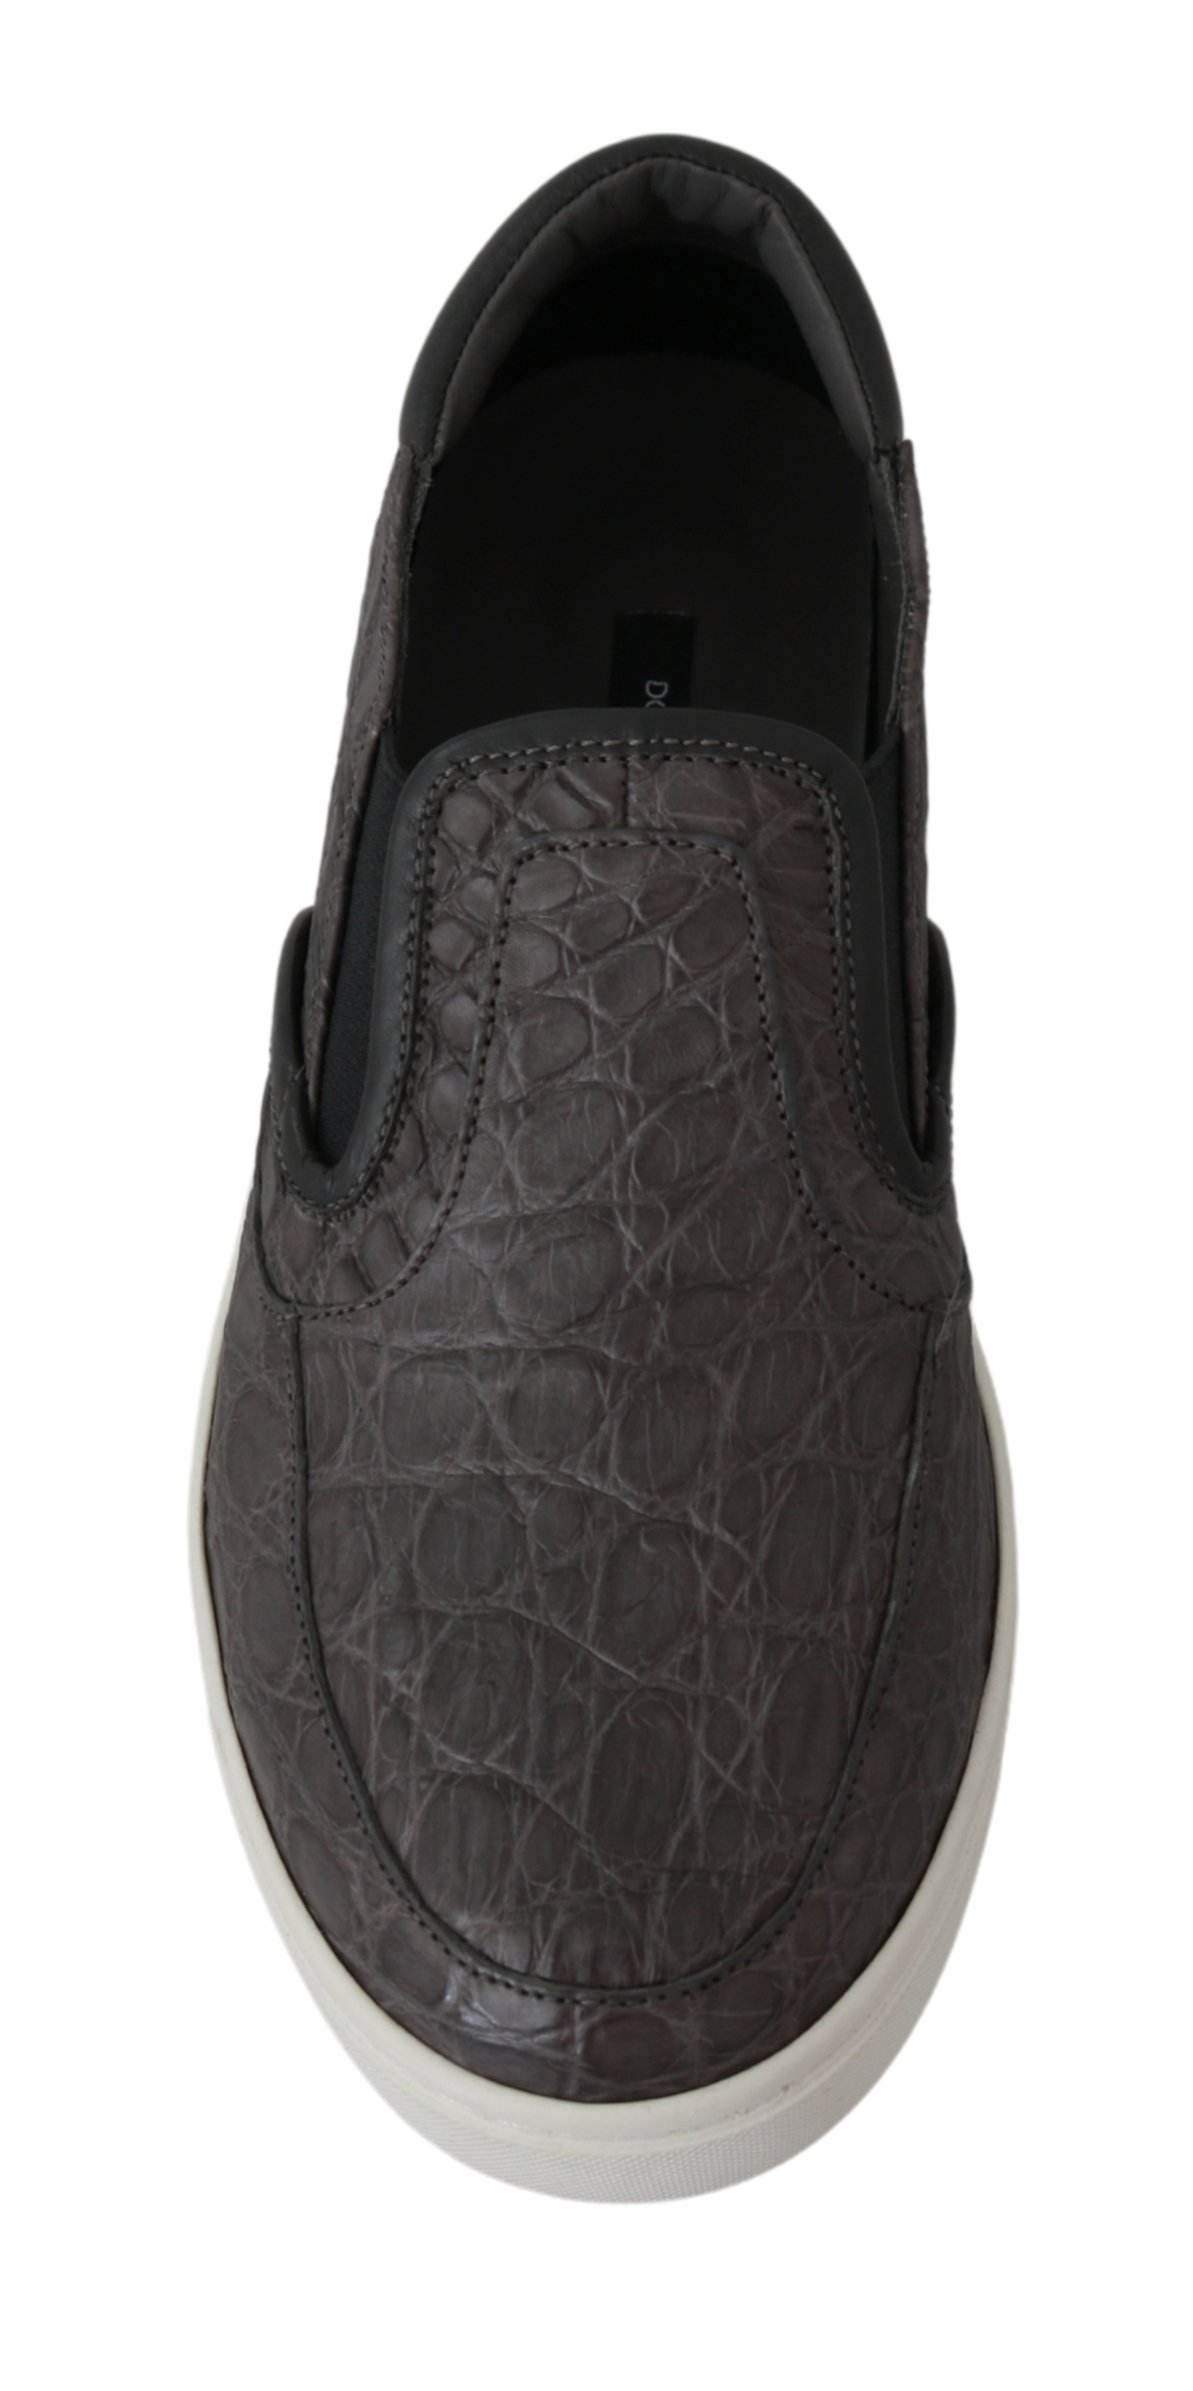 Dolce & Gabbana Gray Leather Flat Caiman Mens Loafers Shoes #men, Brand_Dolce & Gabbana, Catch, Category_Shoes, Dolce & Gabbana, EU39/US6, EU40.5/US7.5, EU40/US7, EU41.5/US8.5, EU41/US8, feed-agegroup-adult, feed-color-gray, feed-gender-male, feed-size-US6, feed-size-US7, feed-size-US7.5, feed-size-US8, feed-size-US8.5, Gender_Men, Gray, Kogan, Loafers - Men - Shoes, Shoes - New Arrivals at SEYMAYKA